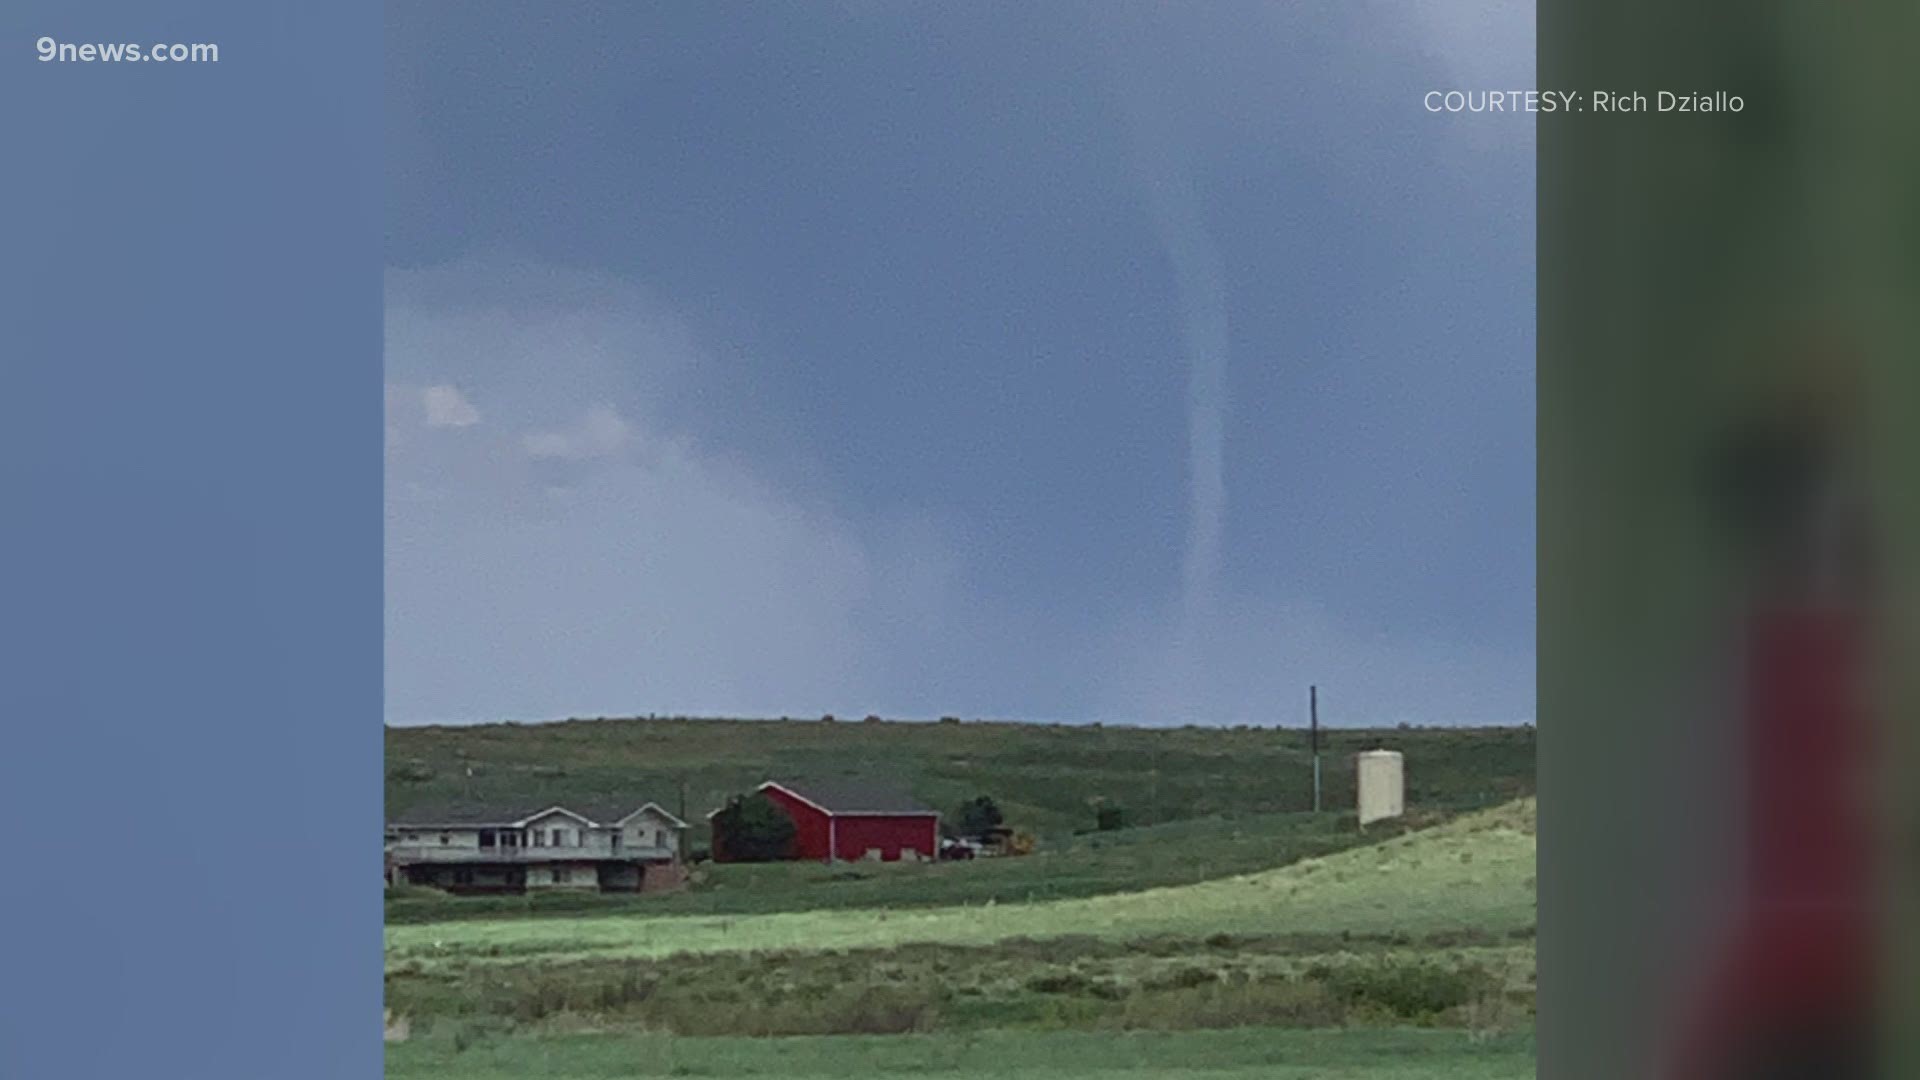 A translucent tornado was spotted in parts of Colorado. 9NEWS Meteorologist Cory Reppenhagen explains what was going on.